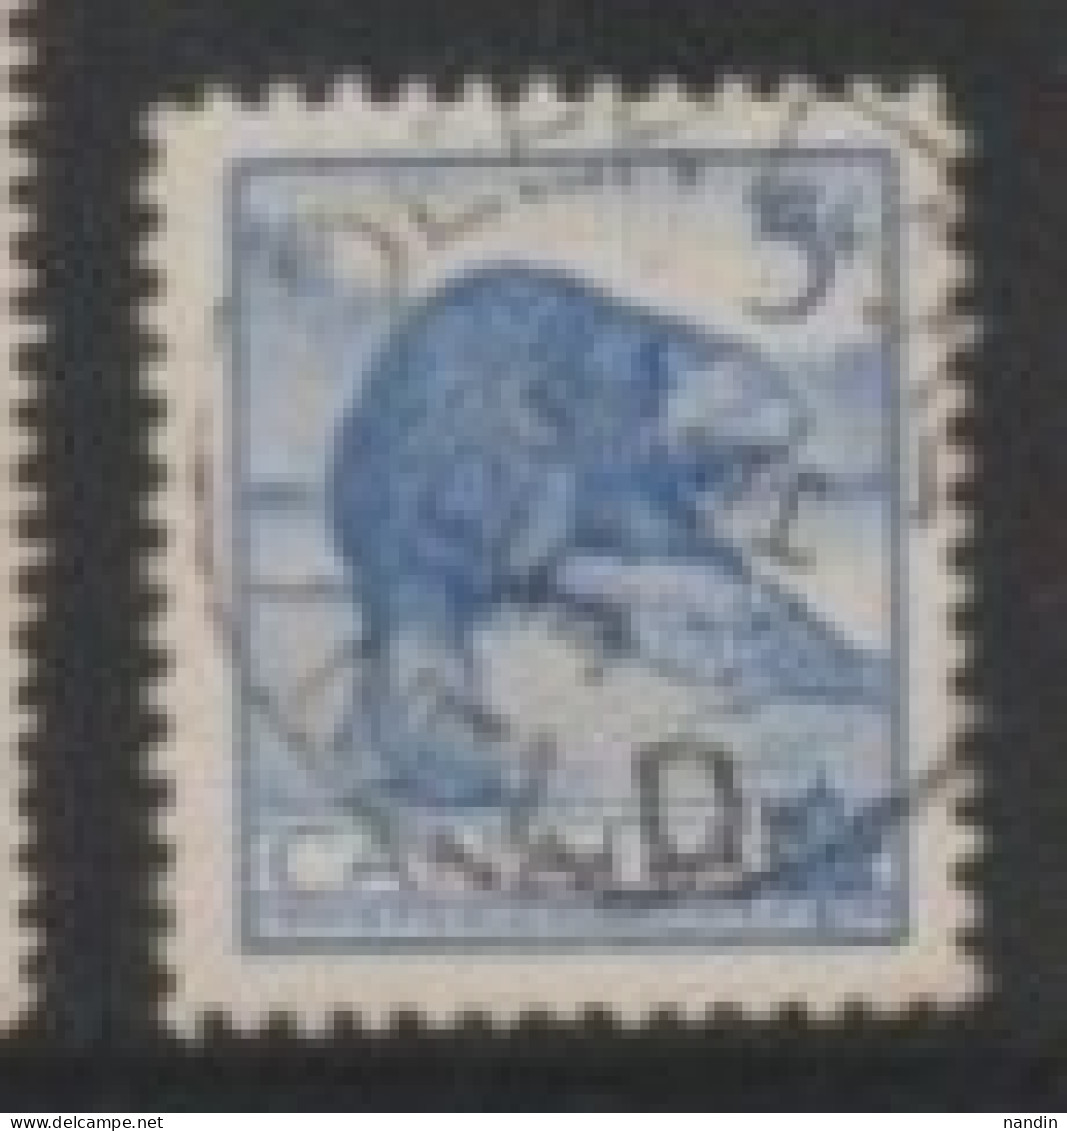 1954 CANADA STAMP (USED) On National Wildlife Week/Fauna/Castor Canadensis/The North American Beaver - Rongeurs